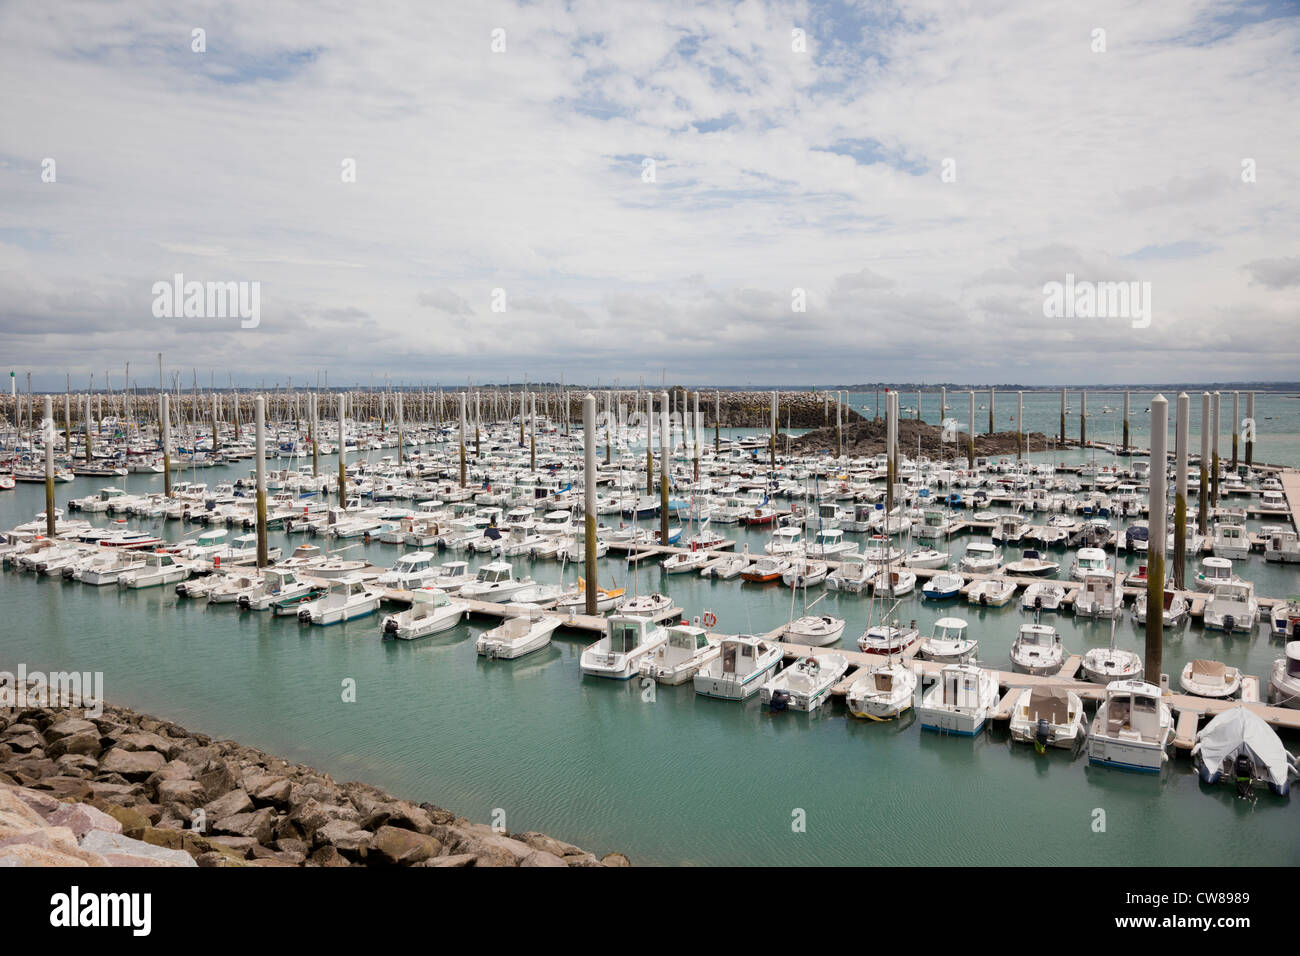 Port St Quay Port d’Armor the new deep water marina, Saint Cast, Northern Brittany, France Stock Photo